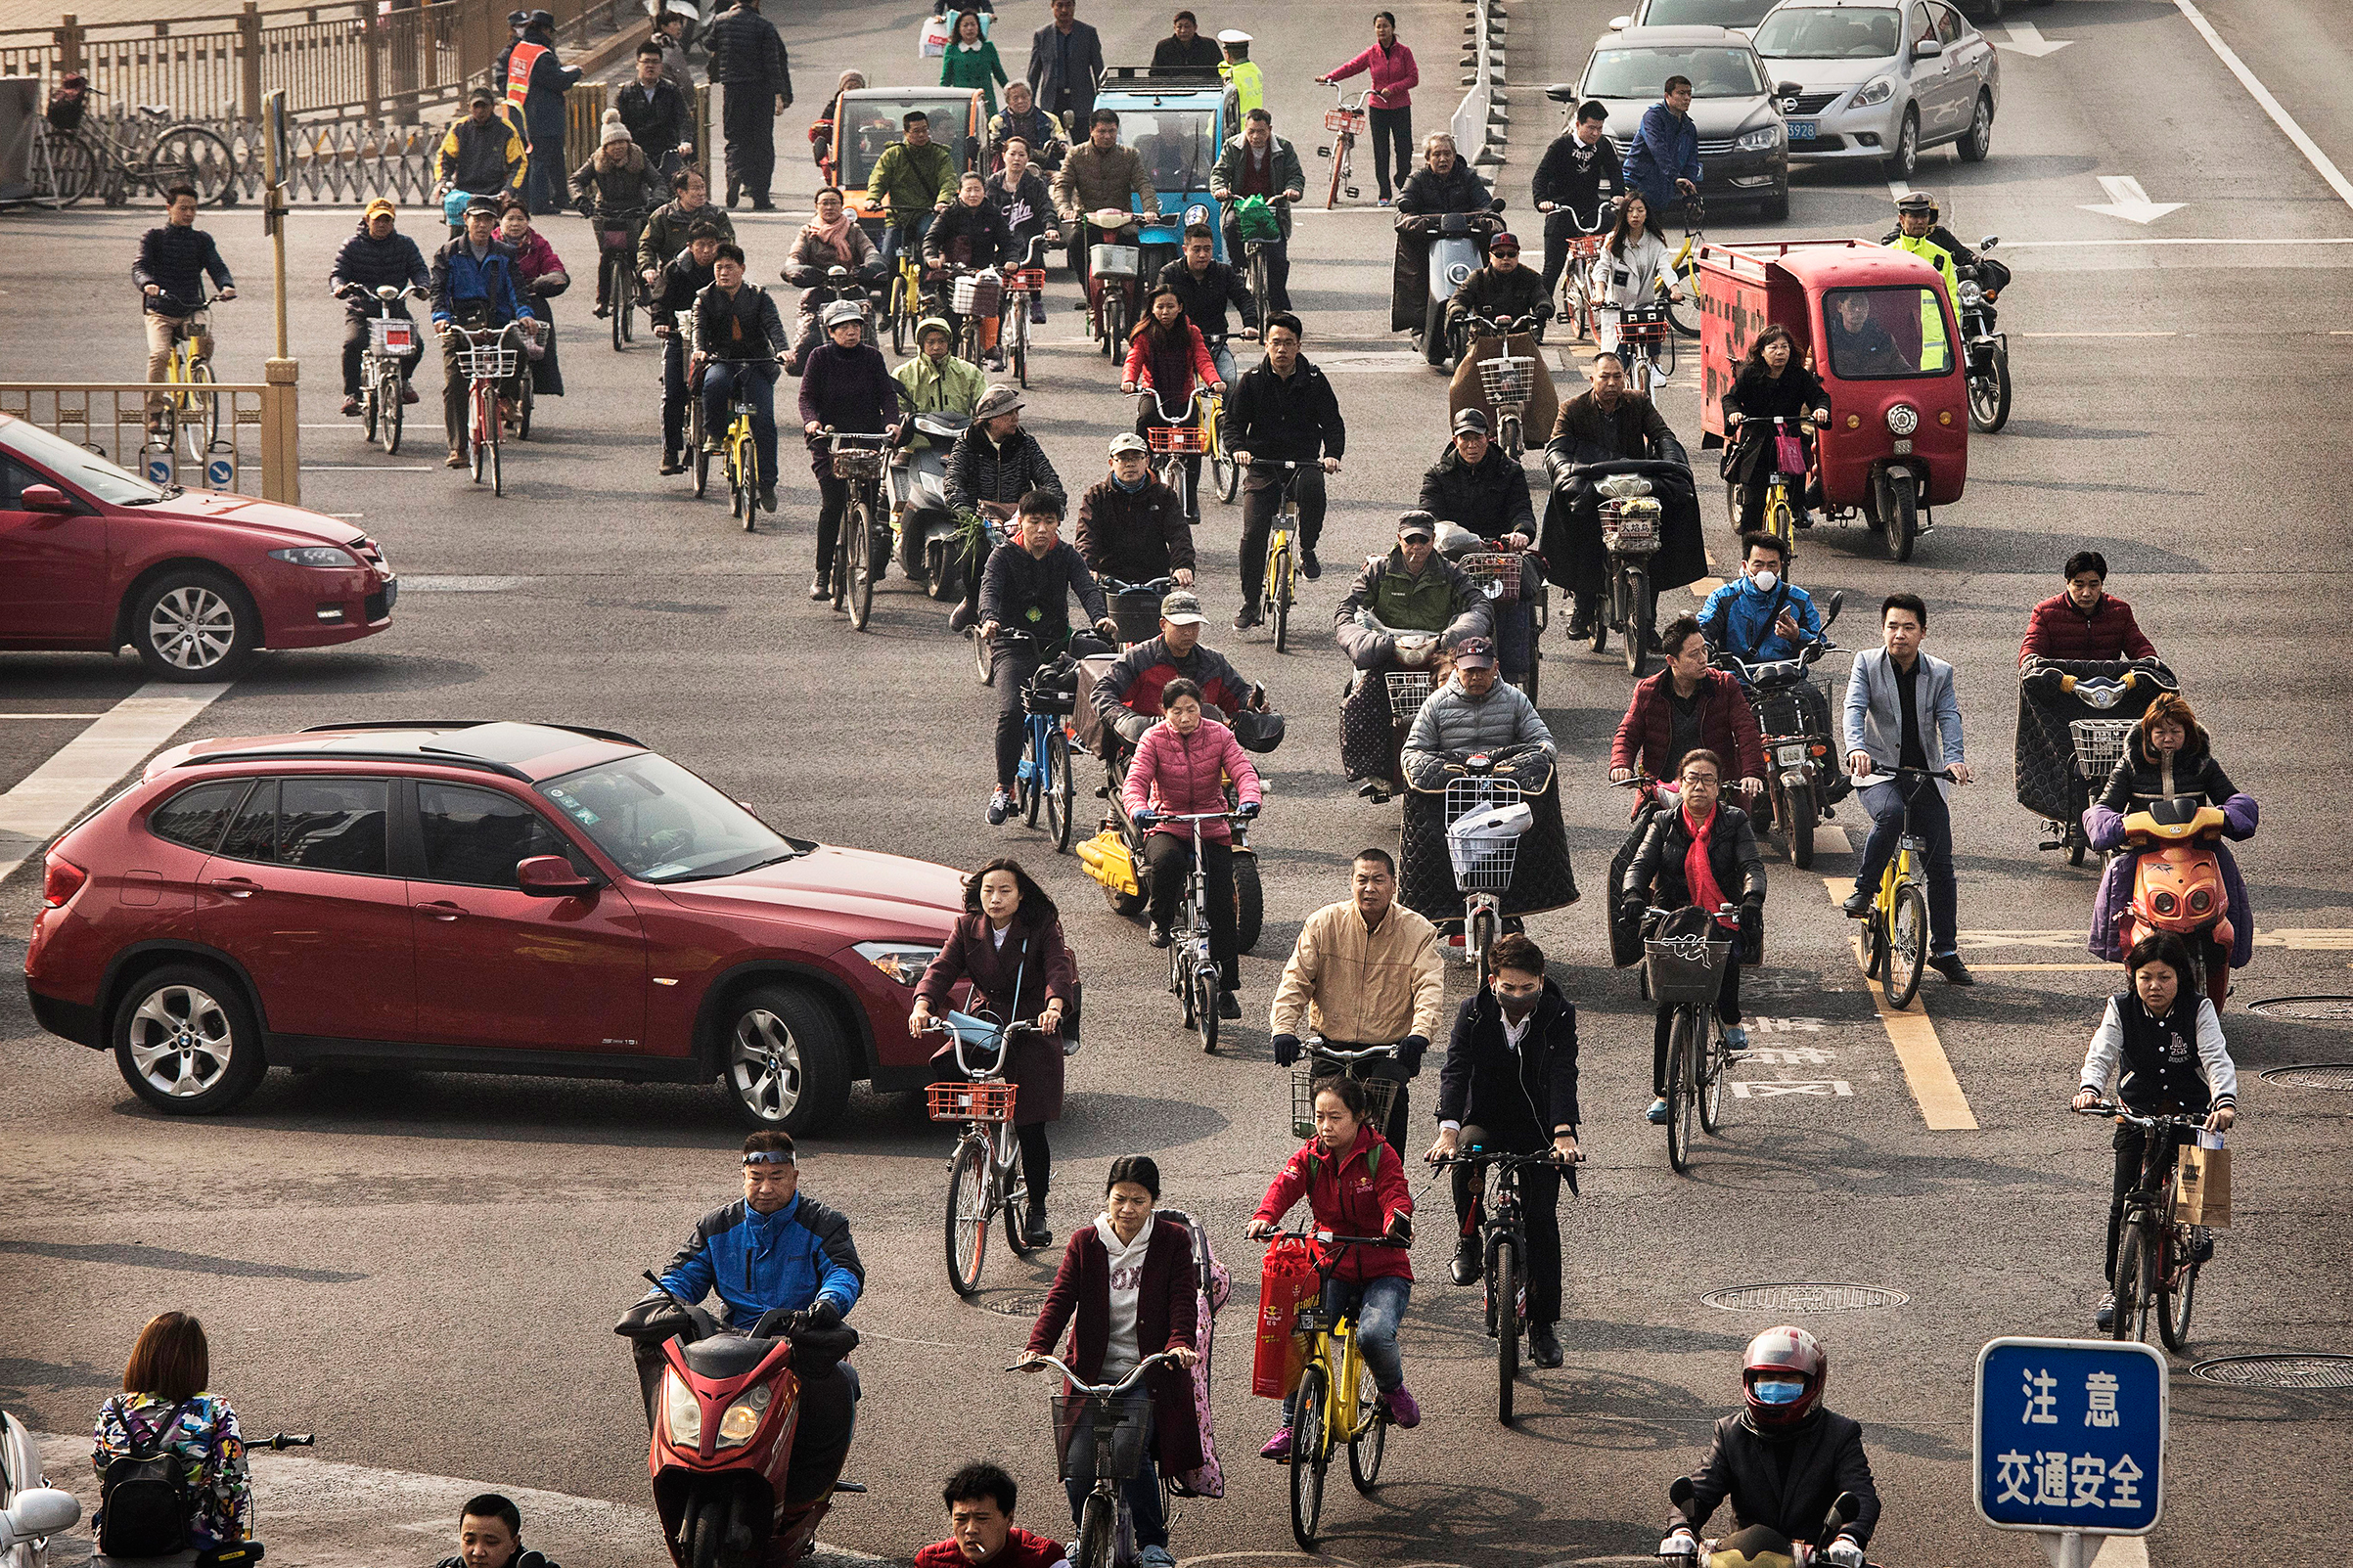 Chinese commuters ride bike shares and other modes of transport in the bicycle lane during rush hour in Beijing on March 29, 2017. (Kevin Frayer—Getty Images)